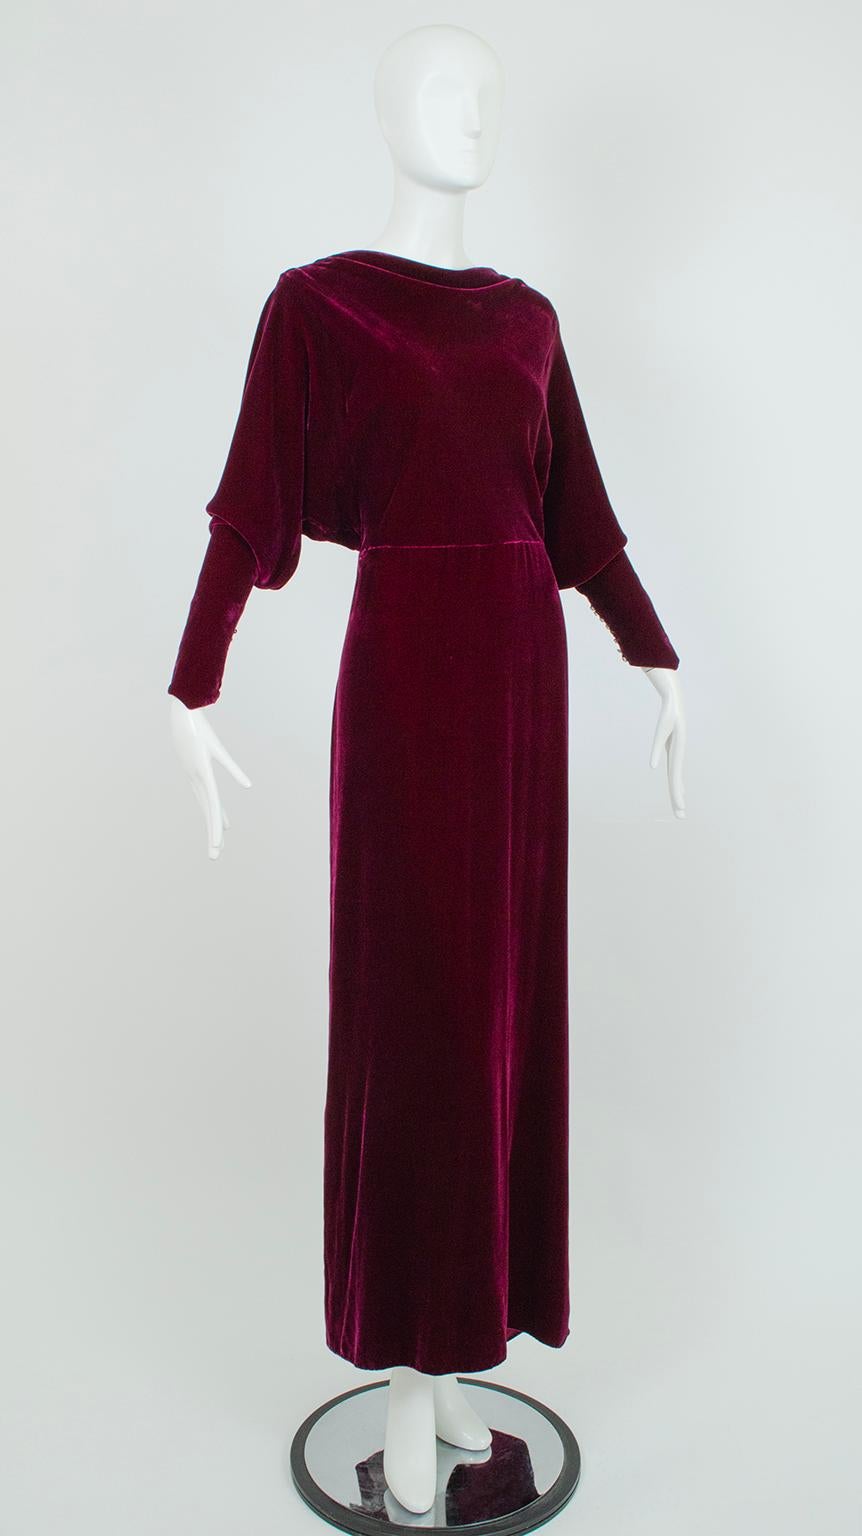 Regency Burgundy Silk Velvet Jeweled Cutout Back Bias Gown with Train – M, 1930s In Good Condition For Sale In Tucson, AZ